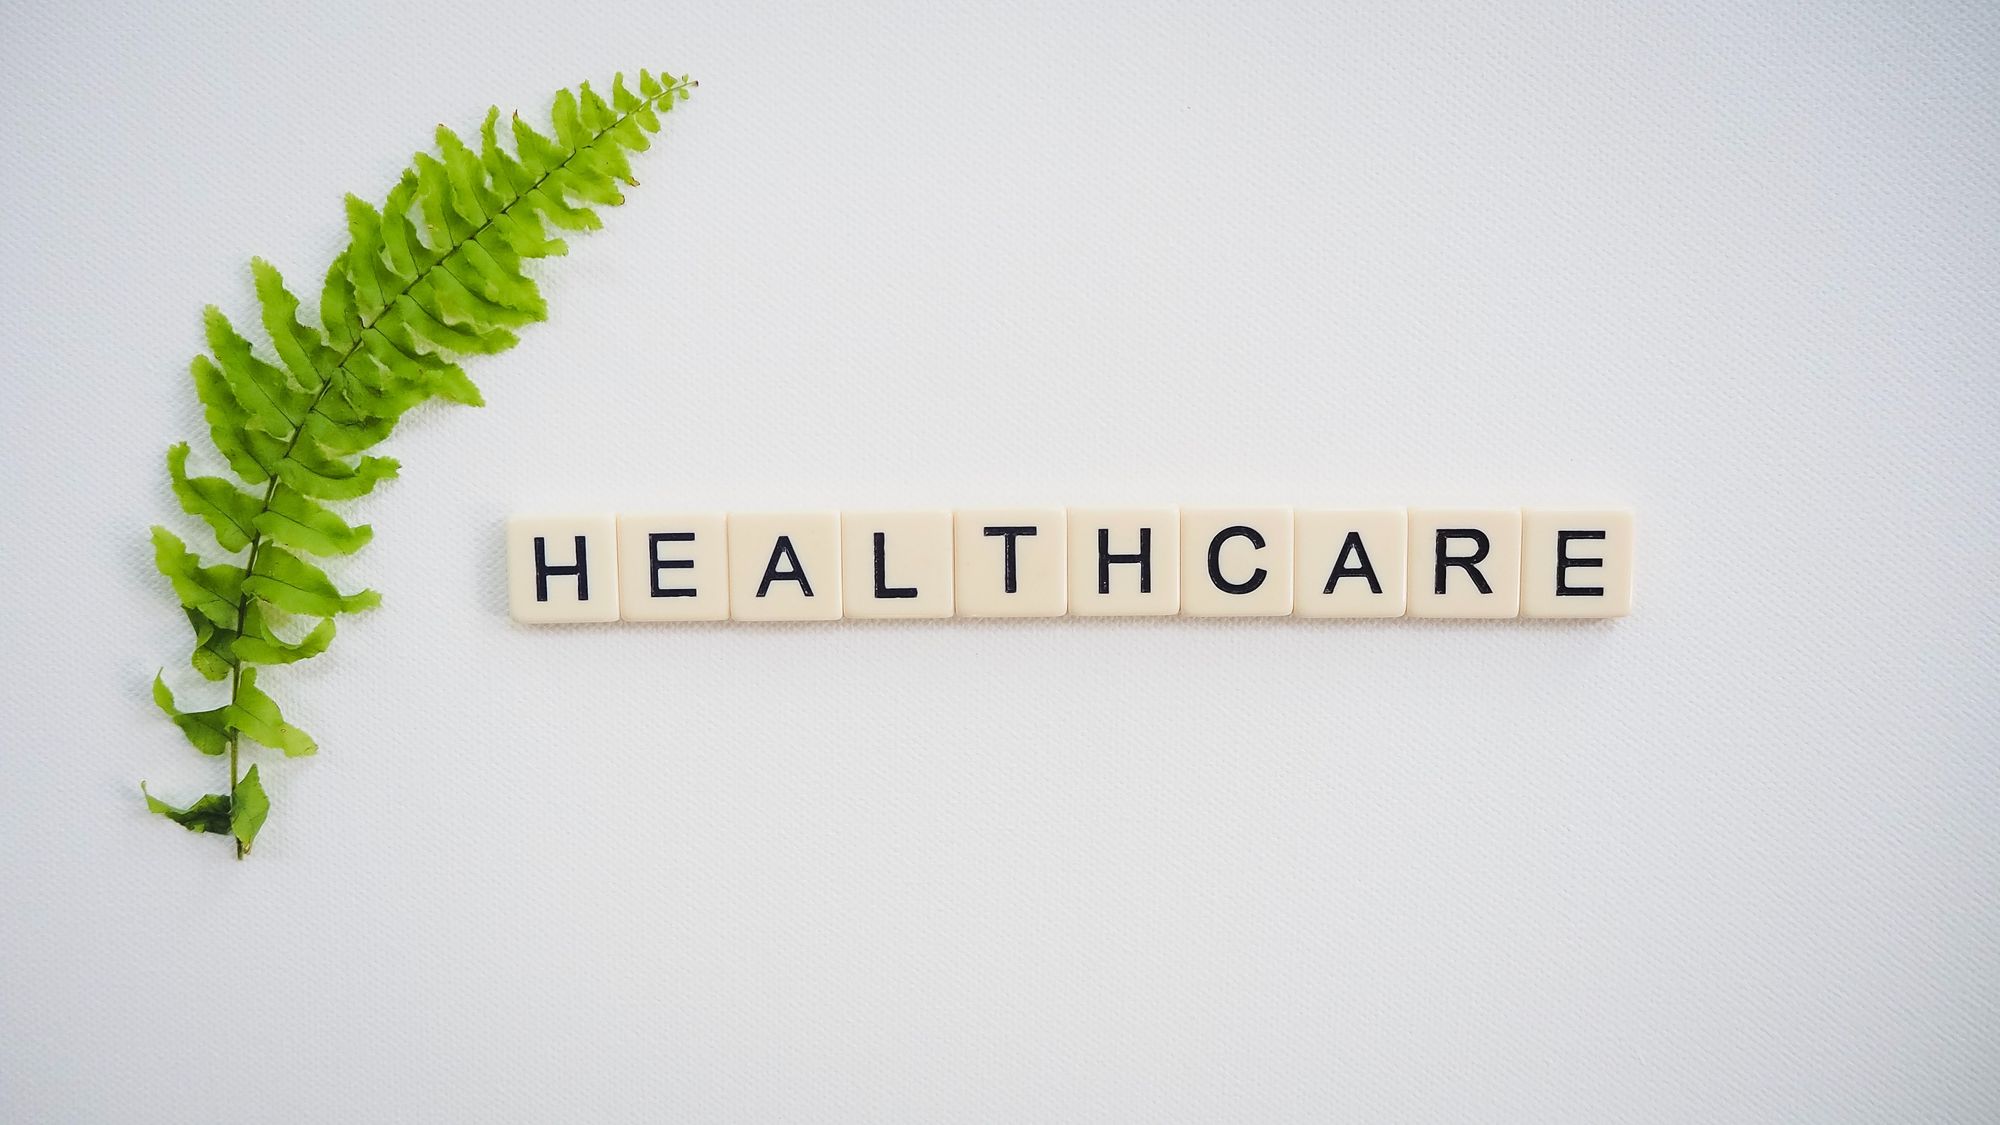 An image showing tiles spelling out "healthcare" with a leaf by the side